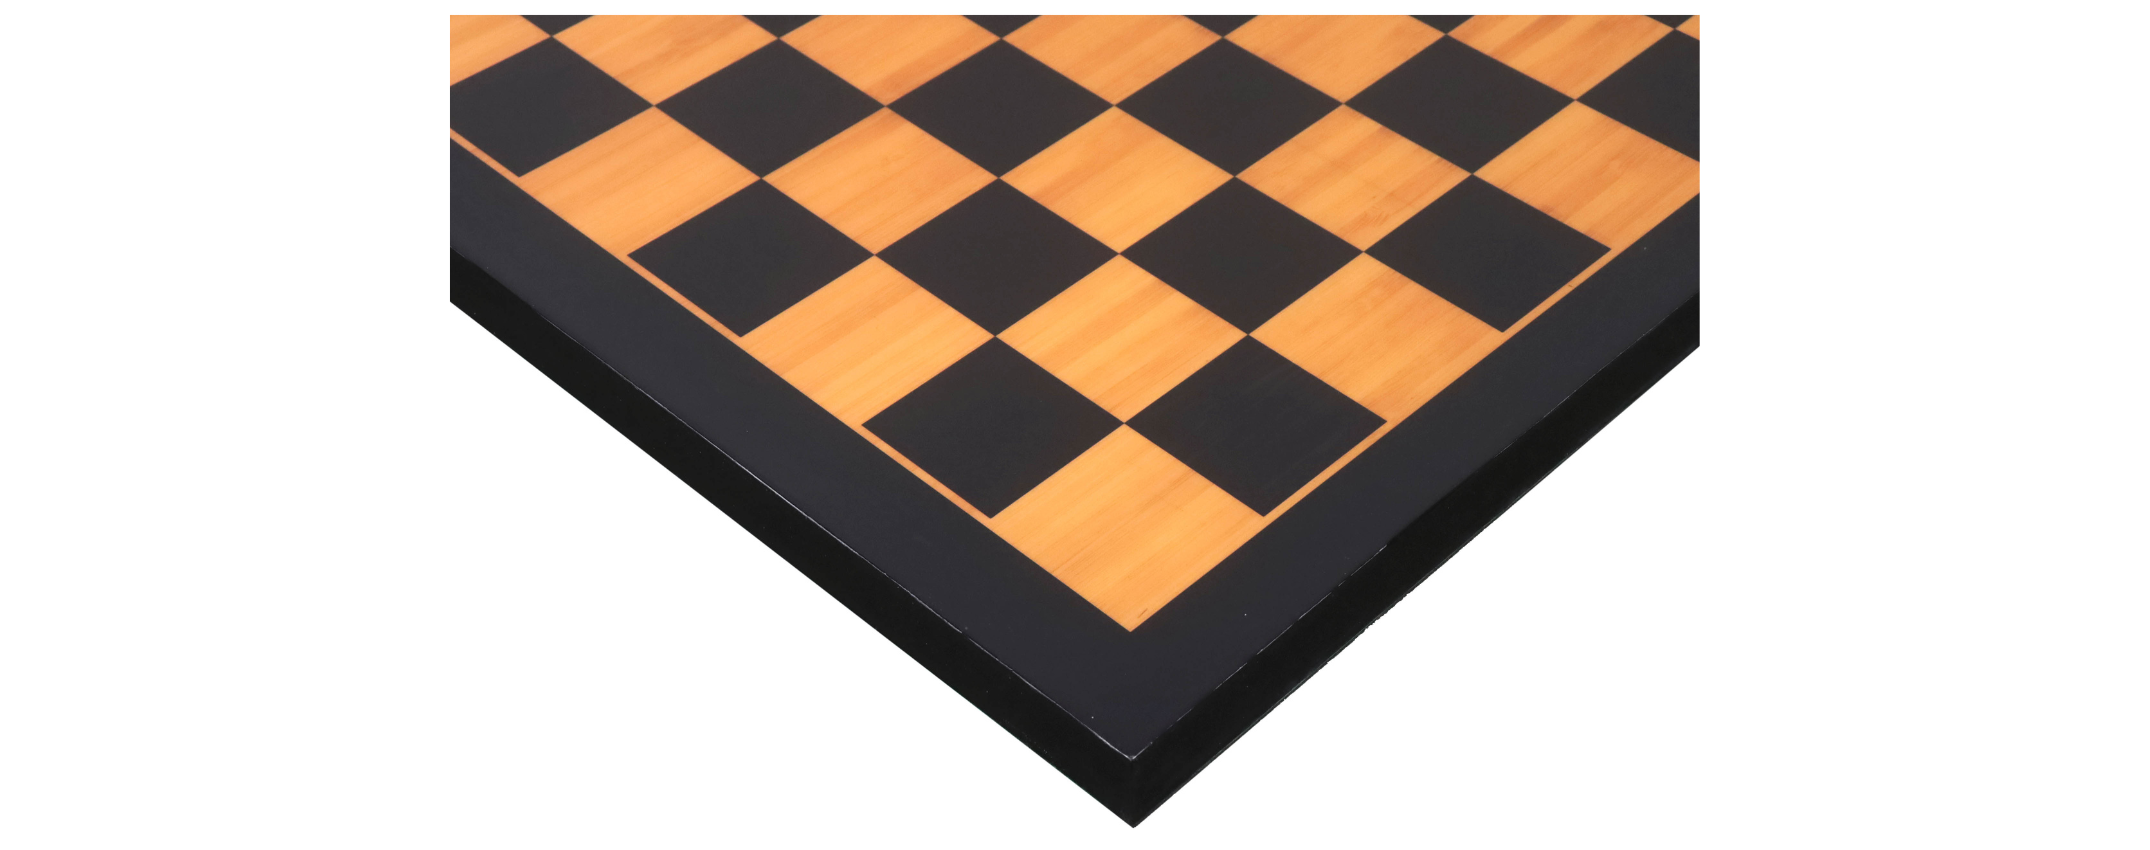 Printed Chess Boards